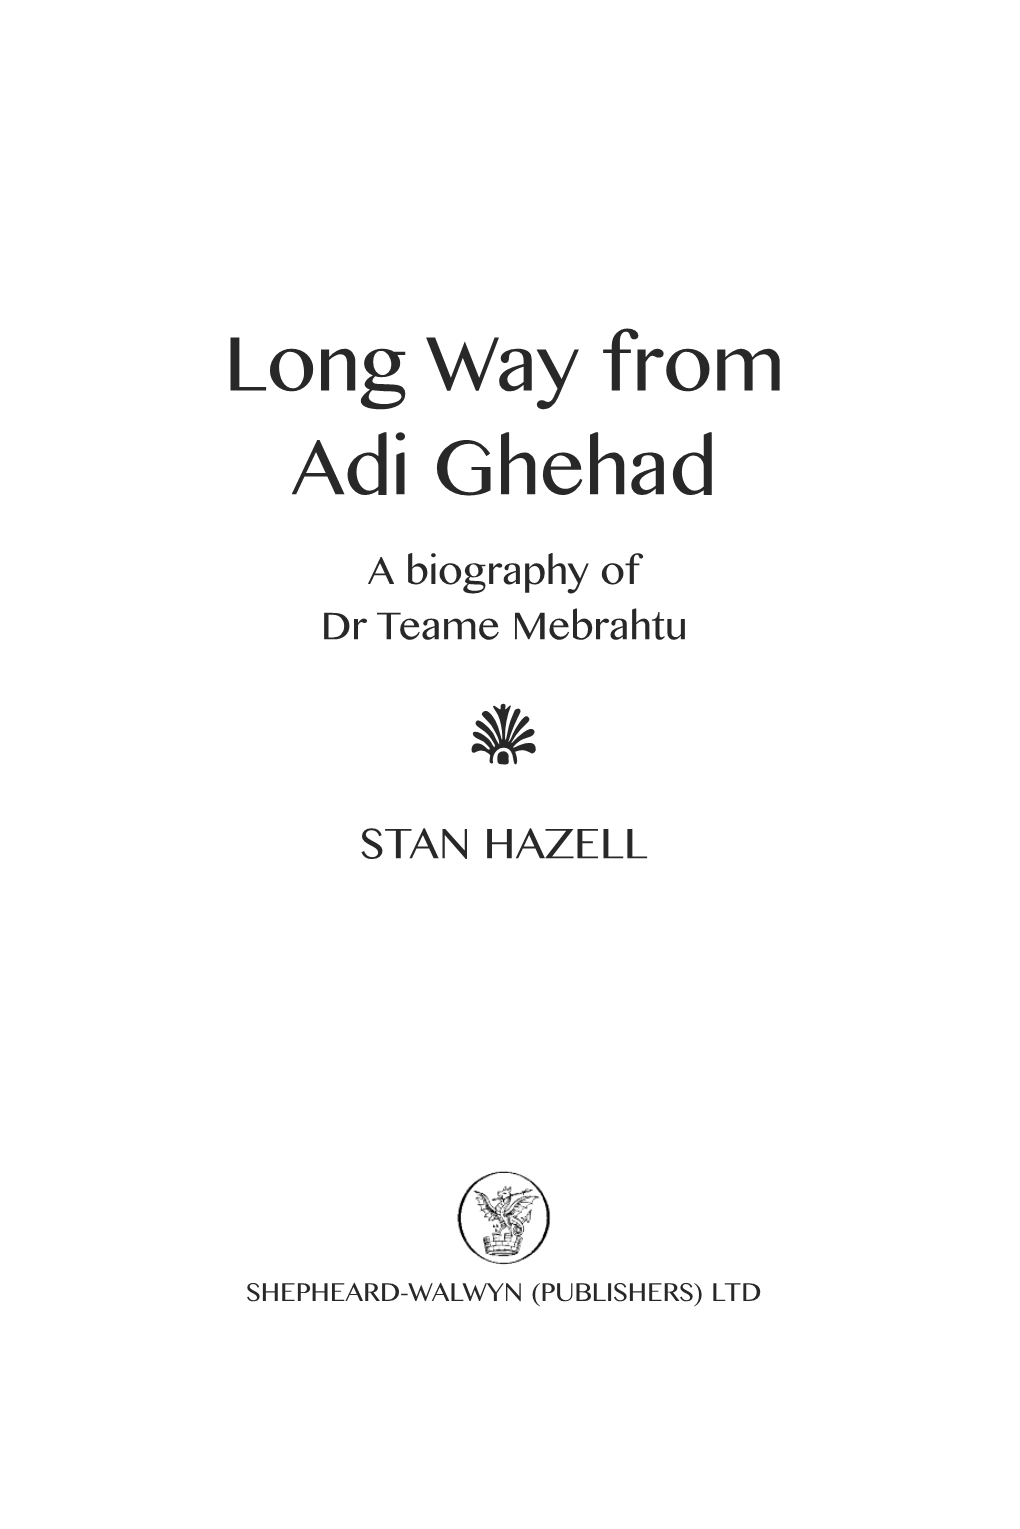 Long Way from Adi Ghehad a Biography of Dr Teame Mebrahtu I